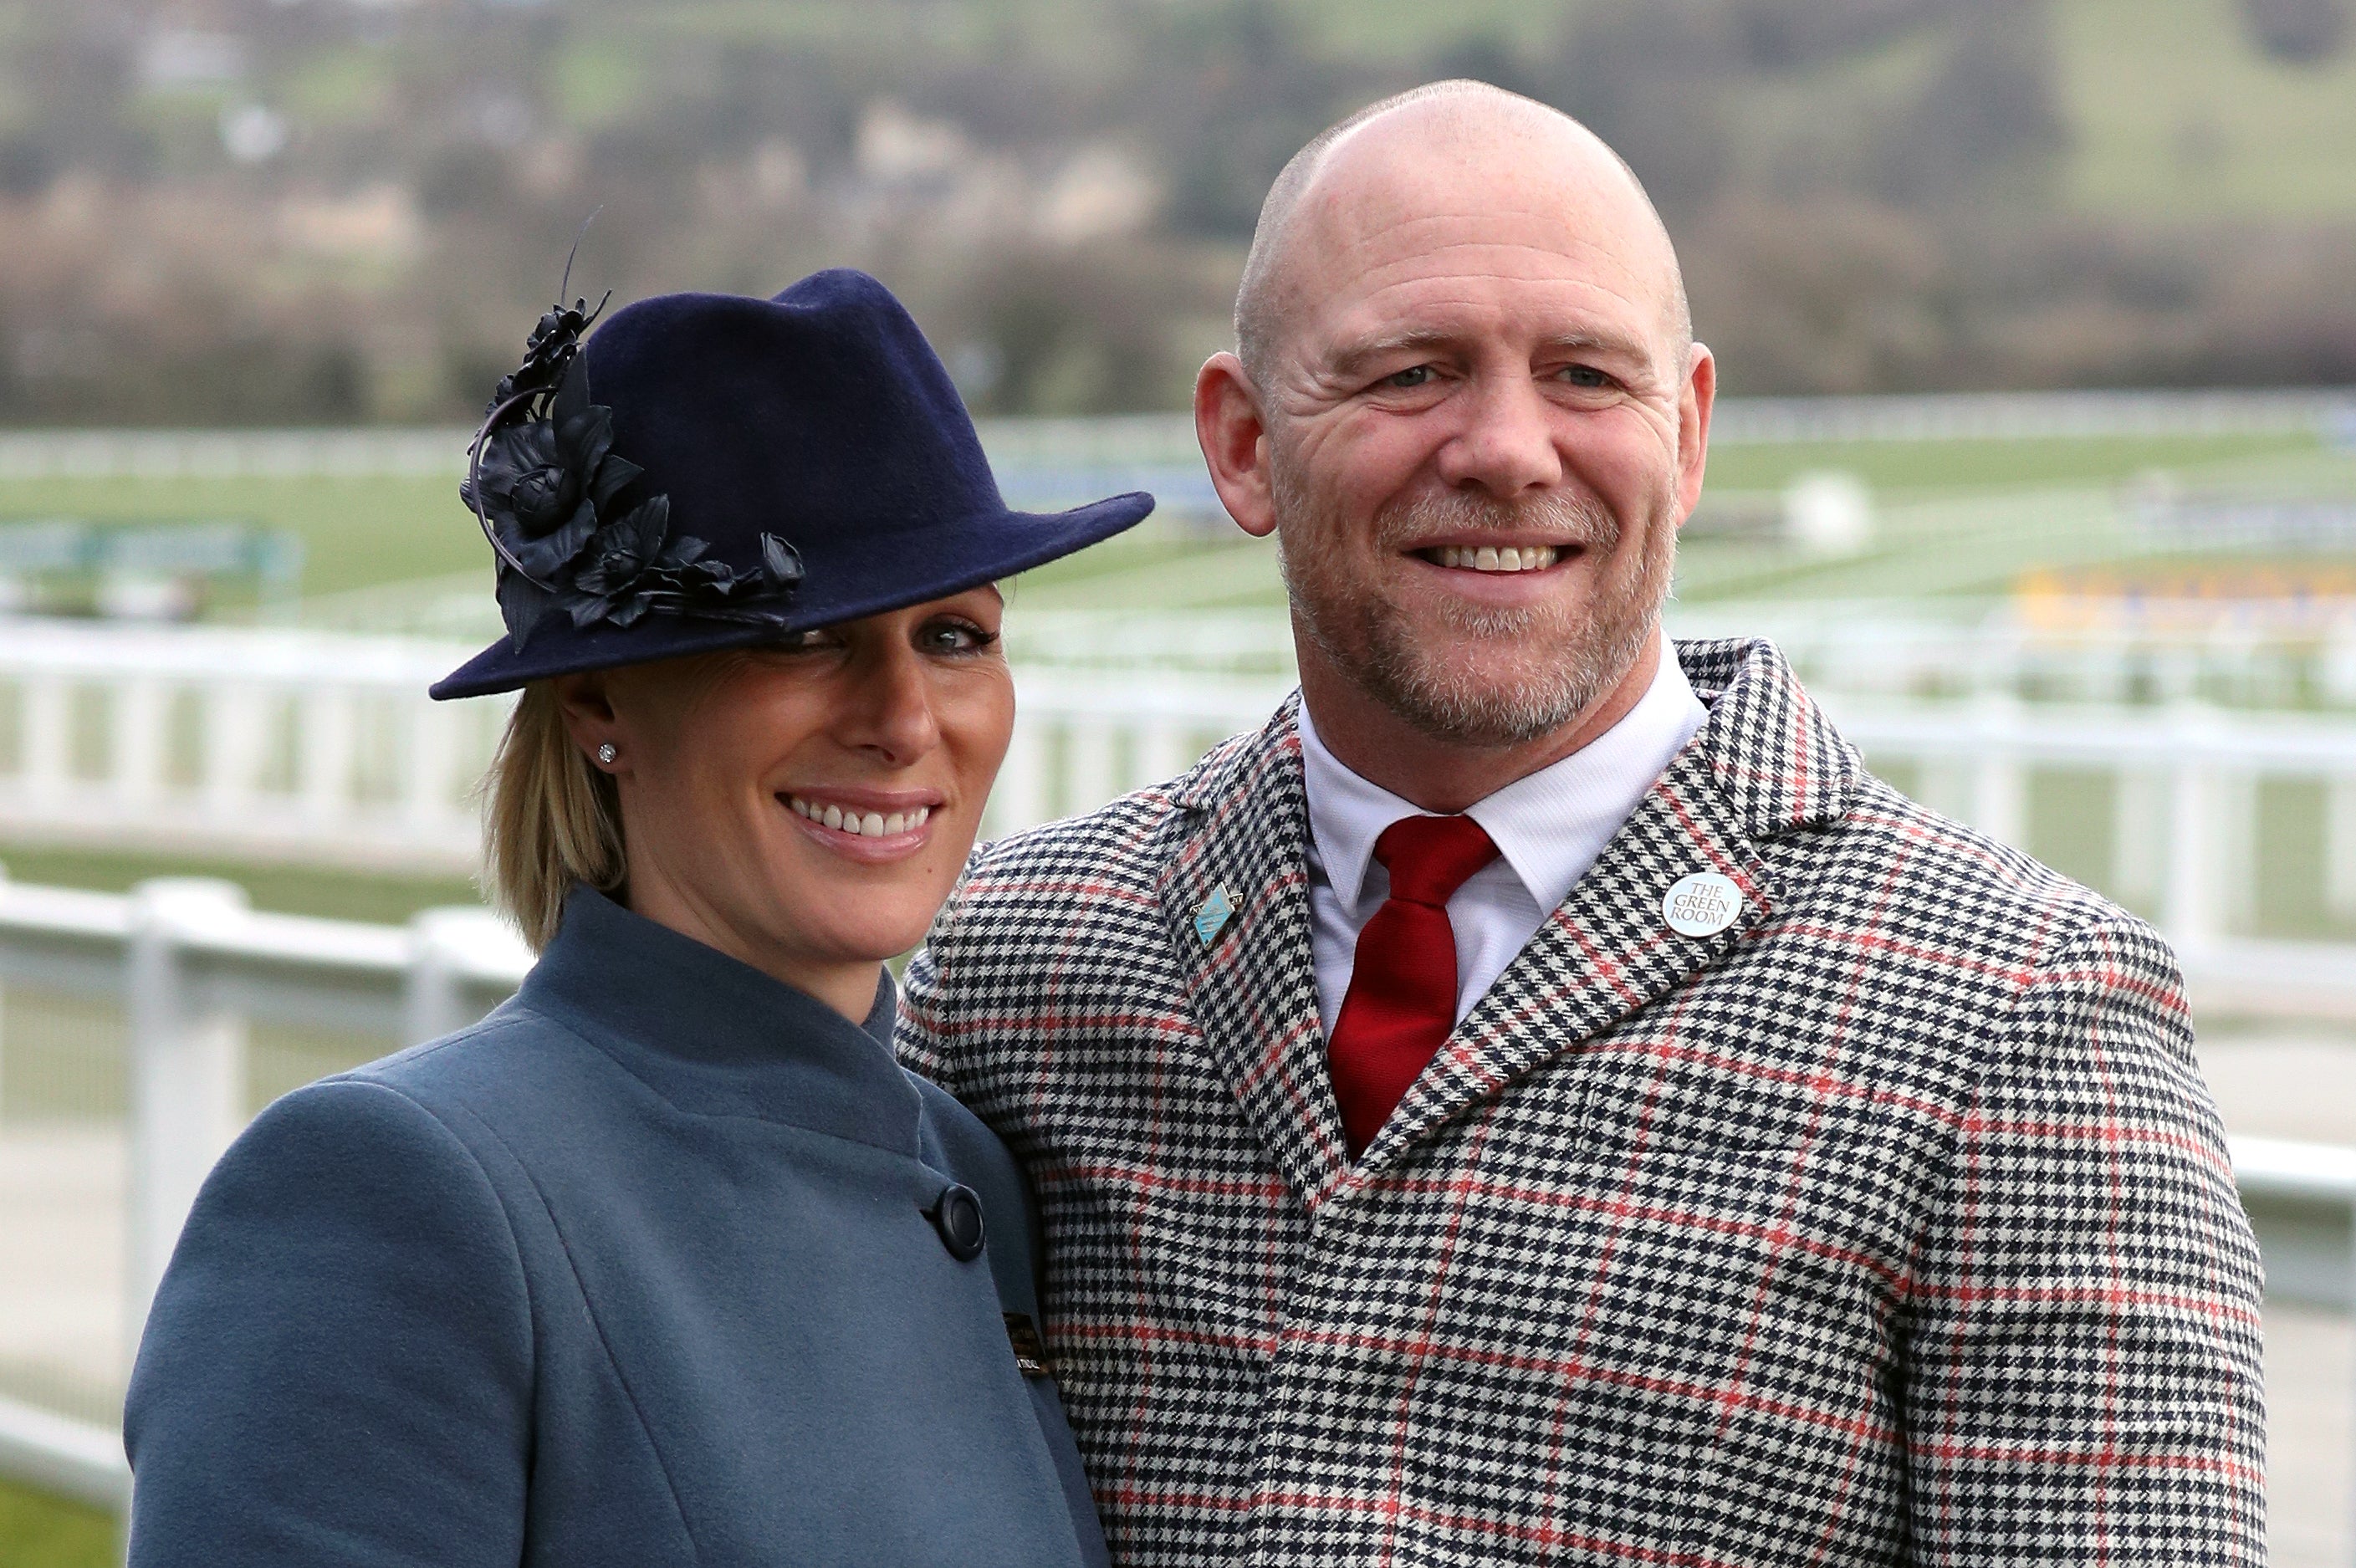 Mike Tindall is married to Zara Tindall, the Queen's granddaughter